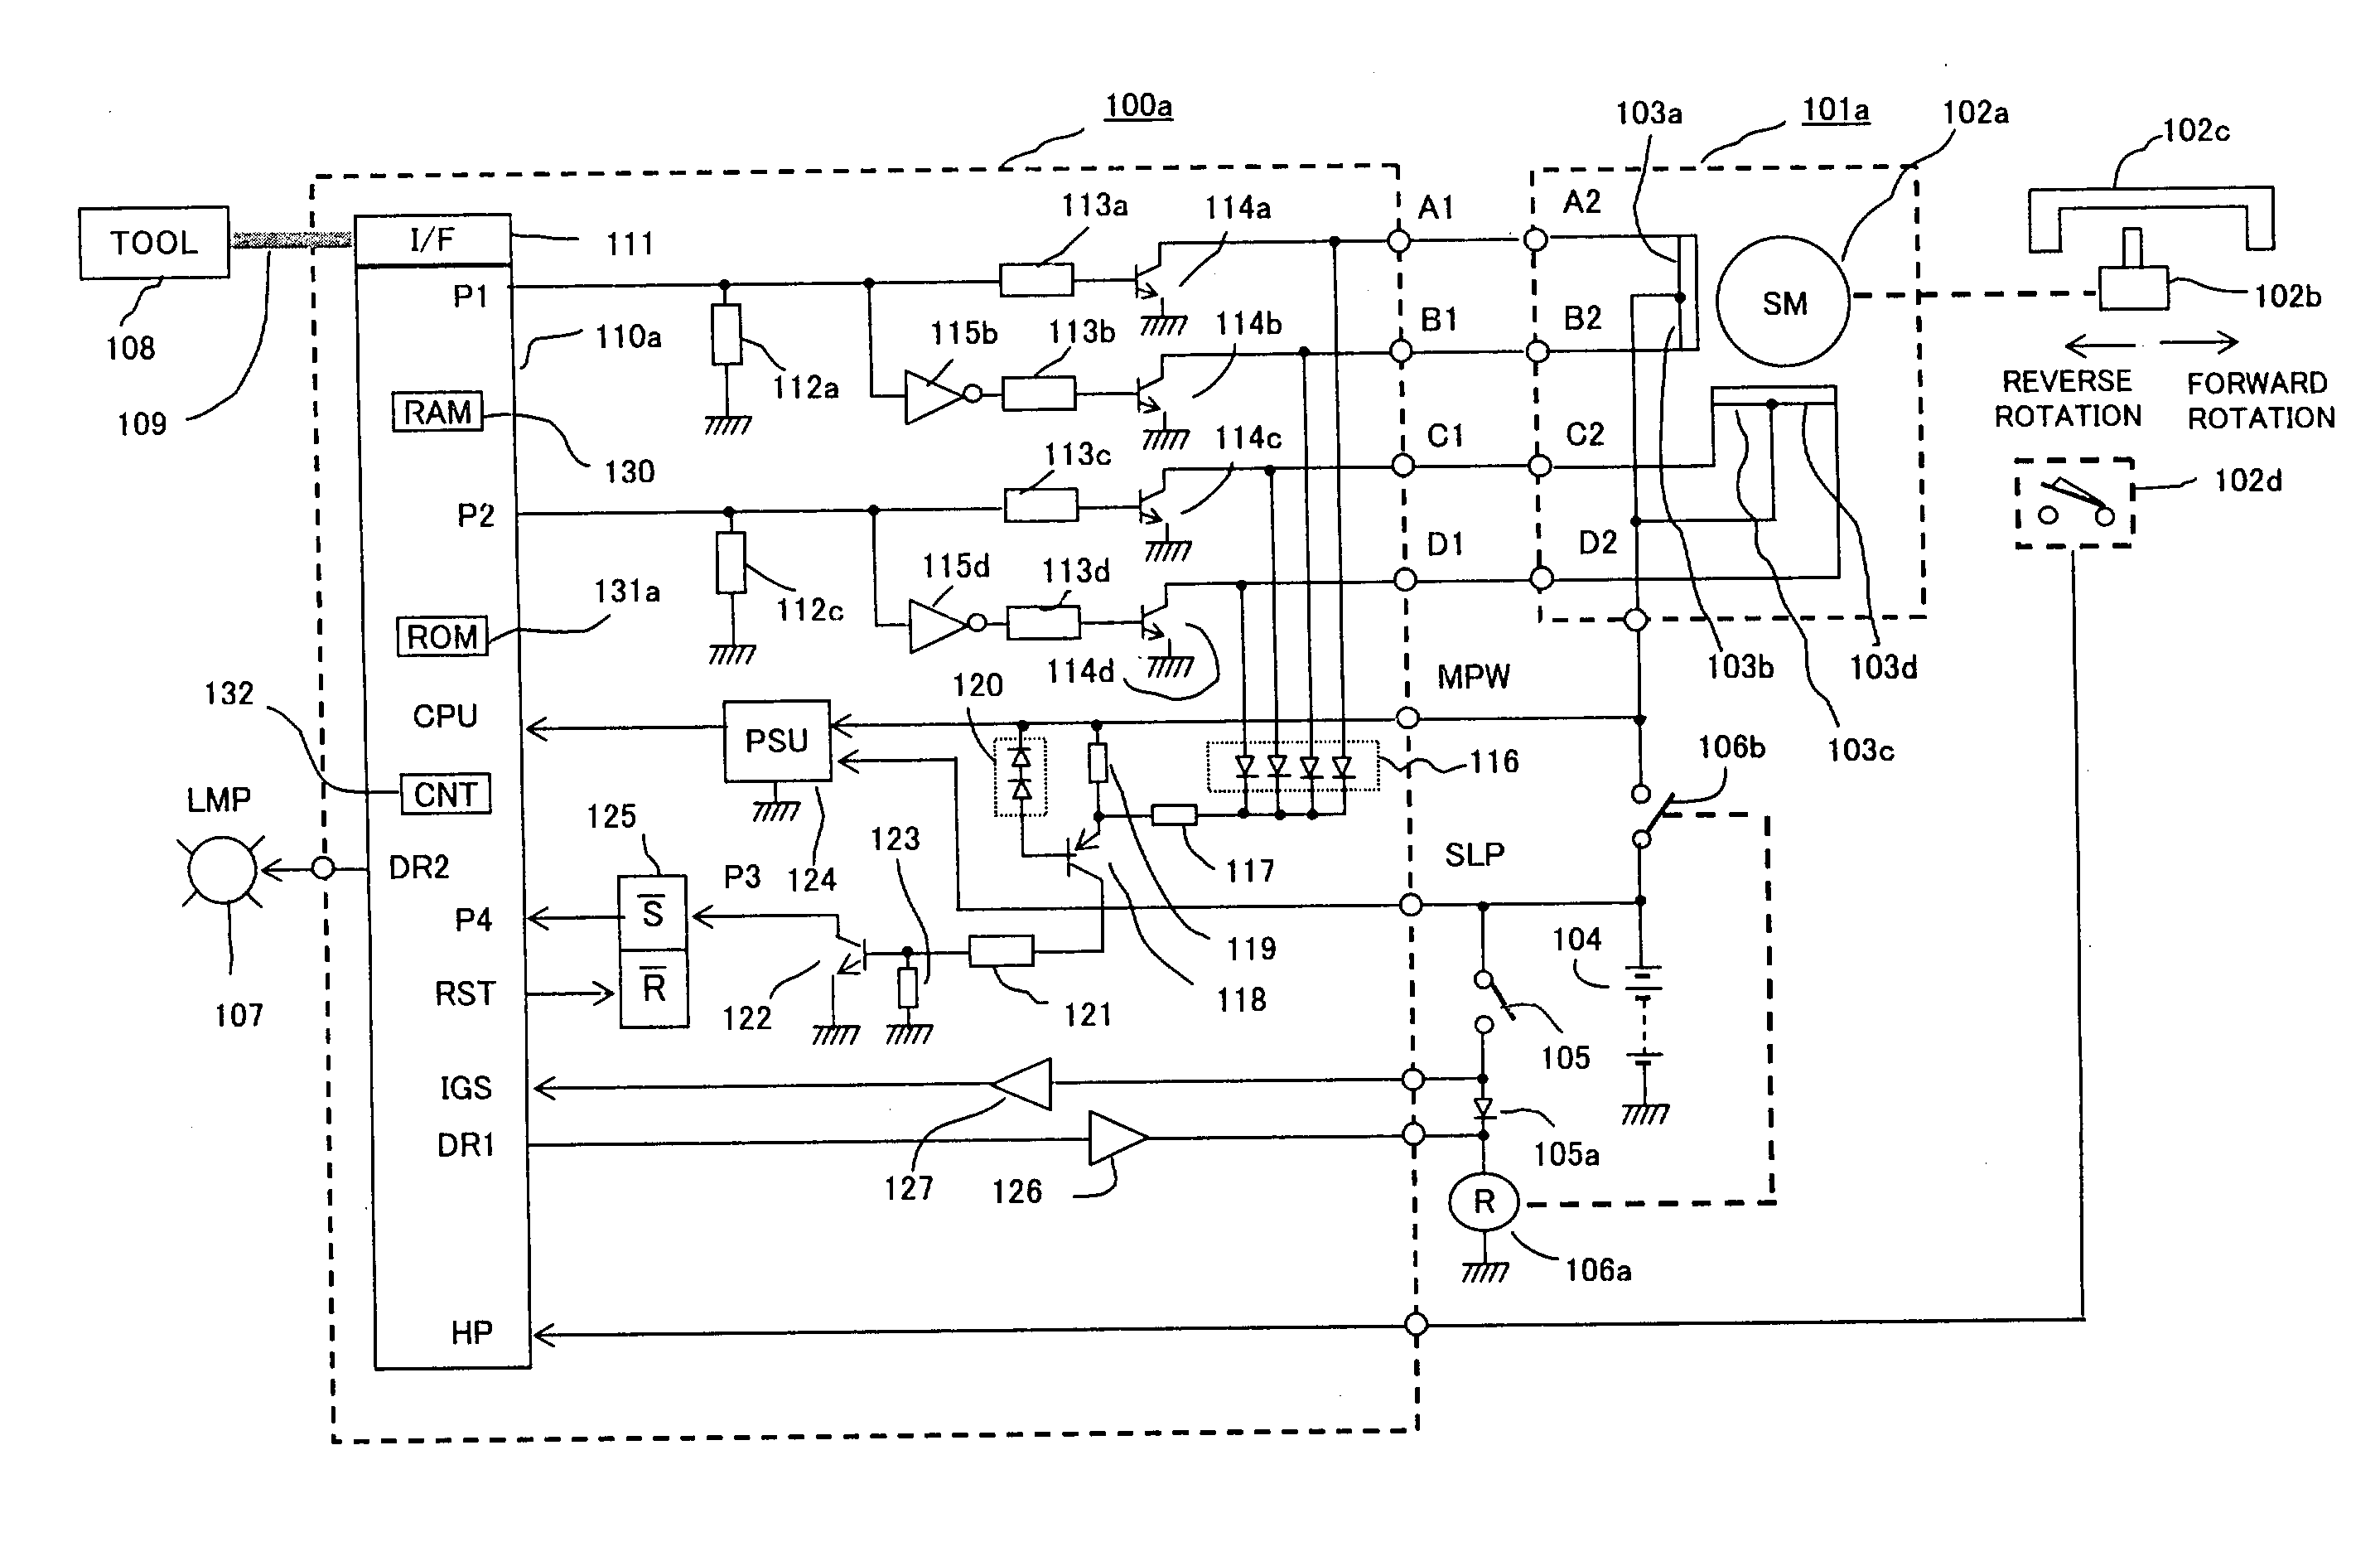 Abnormality detector for a motor drive system